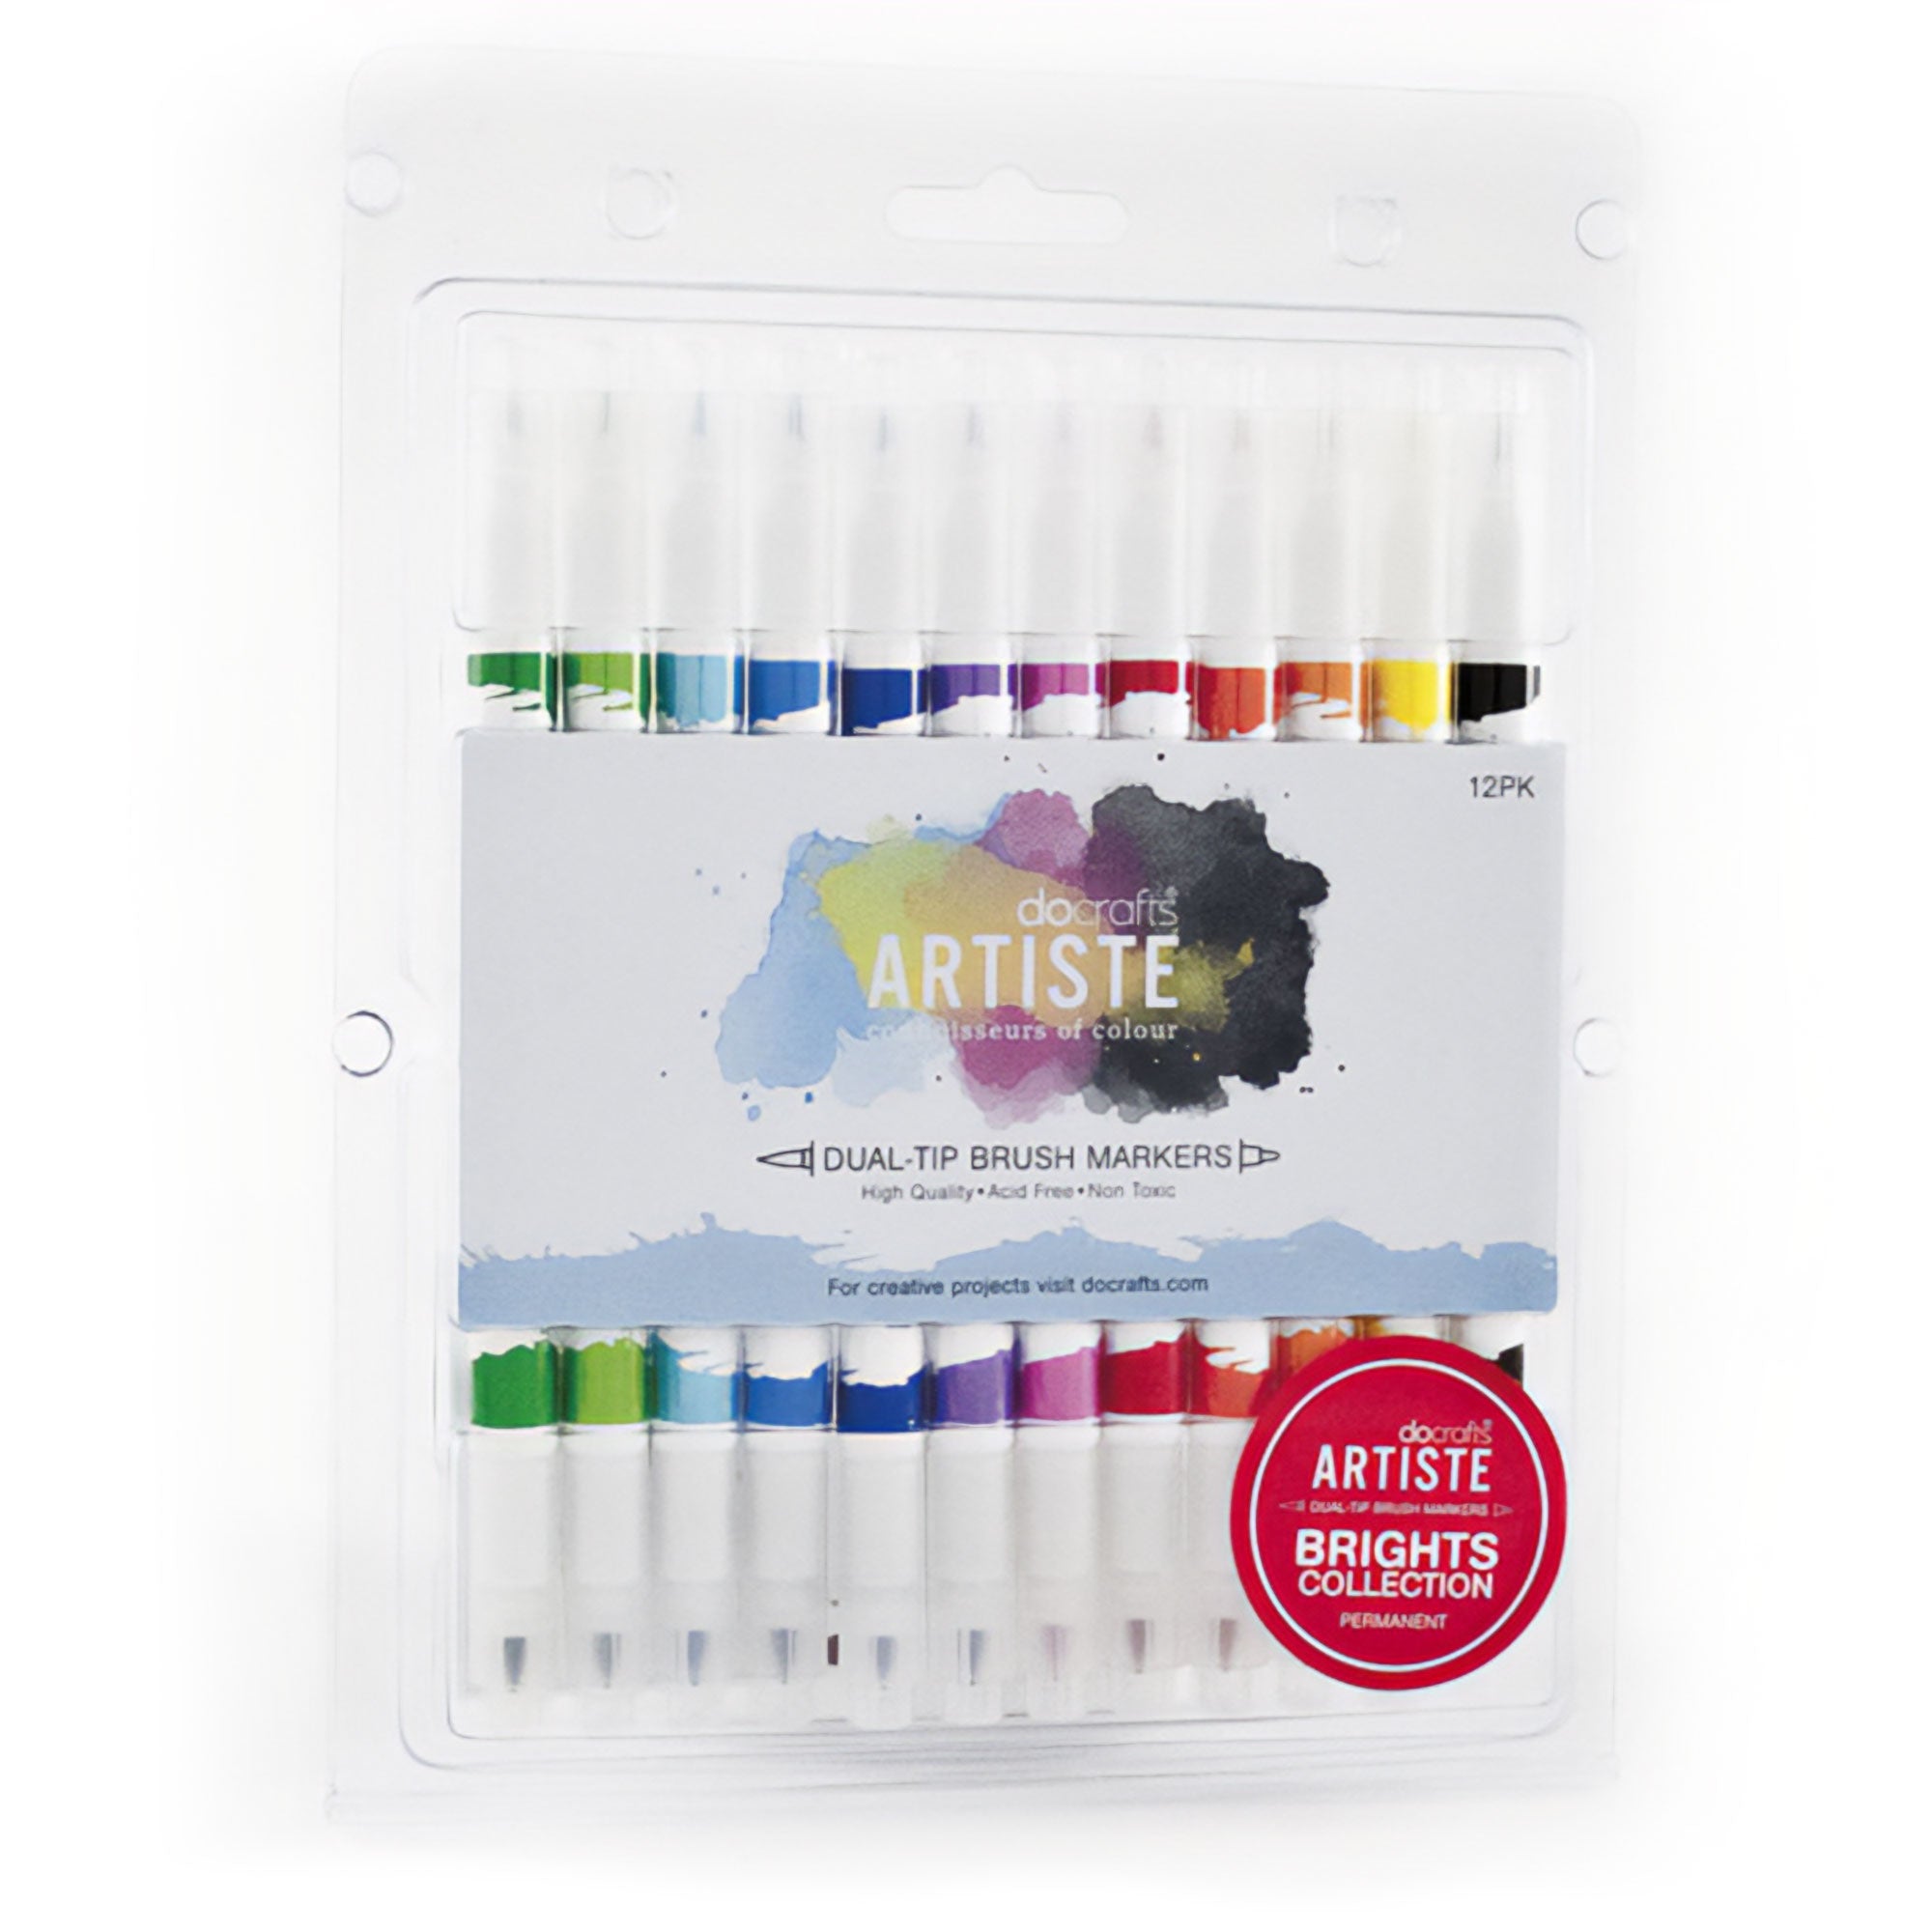 Docrafts Artiste Dual Tip BRIGHTS Brush Markers